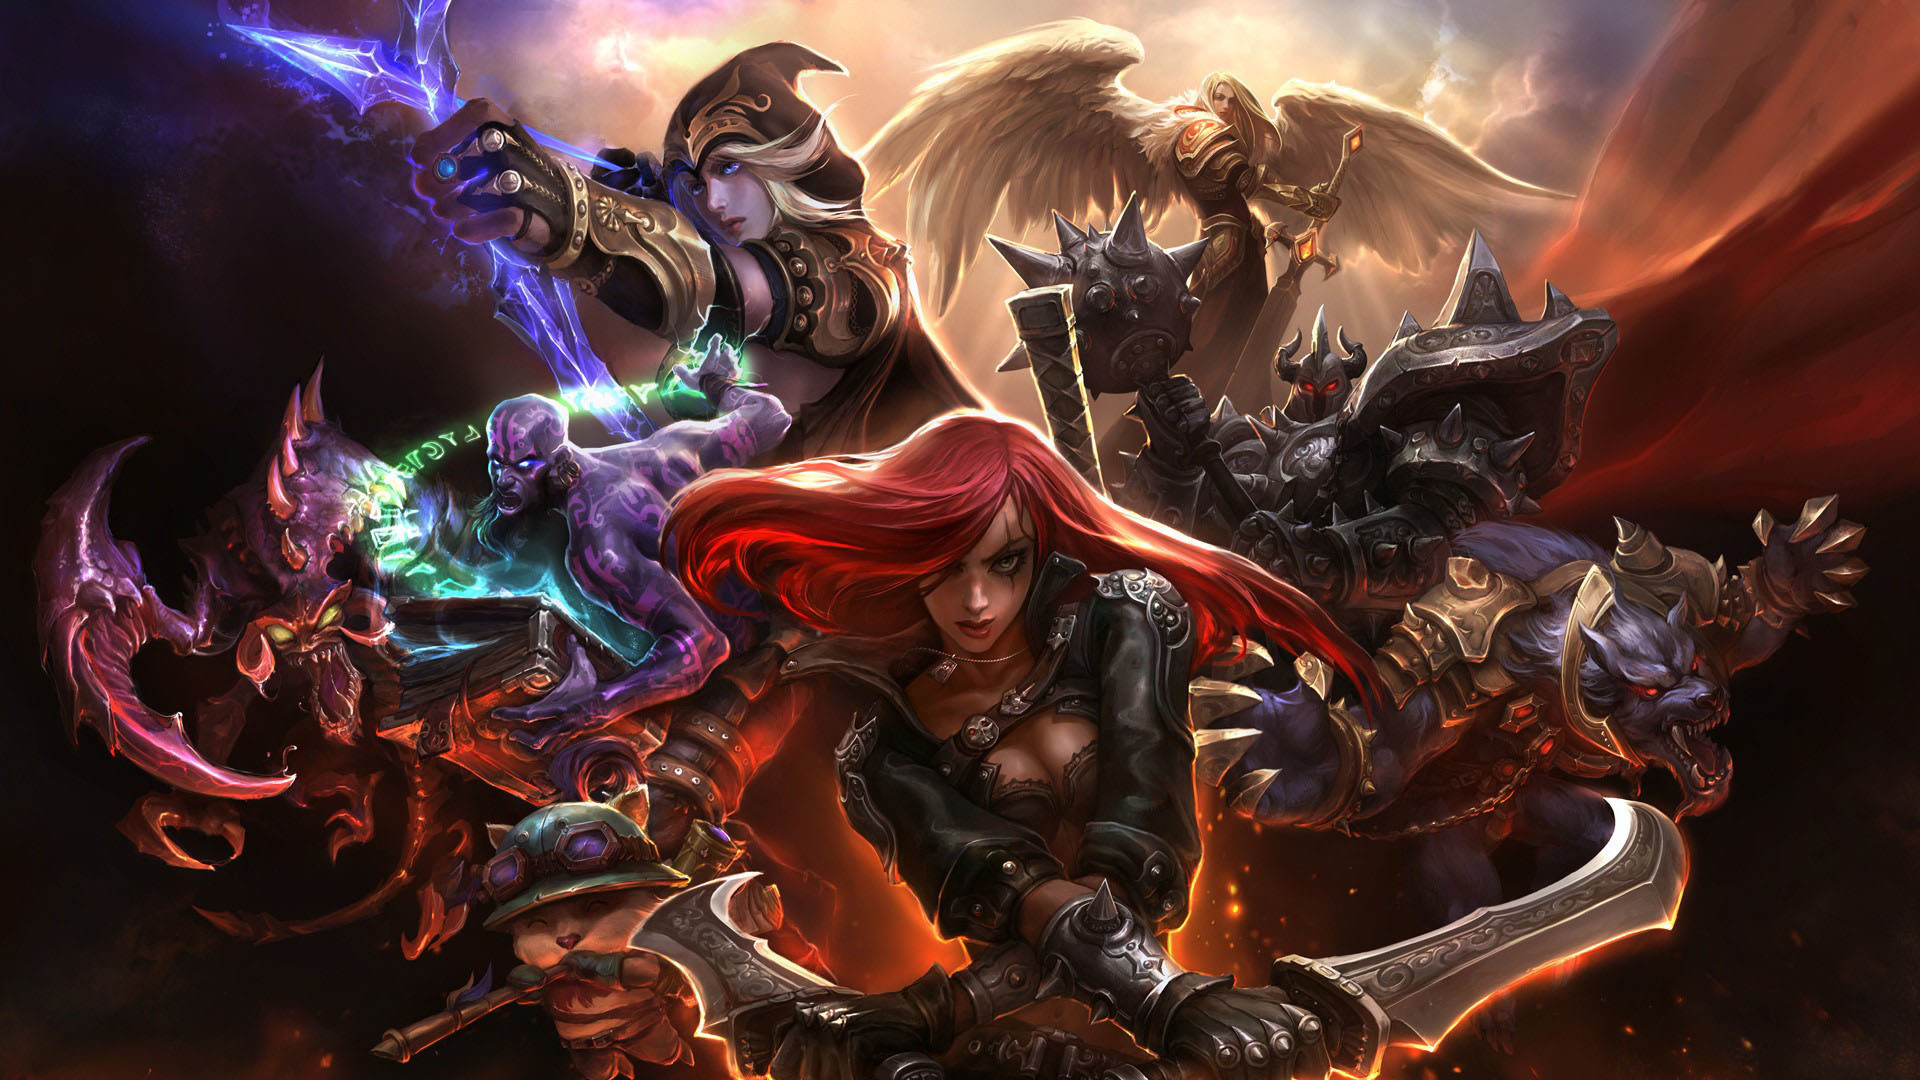 1920x1080 ... 3203 League Of Legends HD Wallpapers | Backgrounds Wallpaper Gallery ...